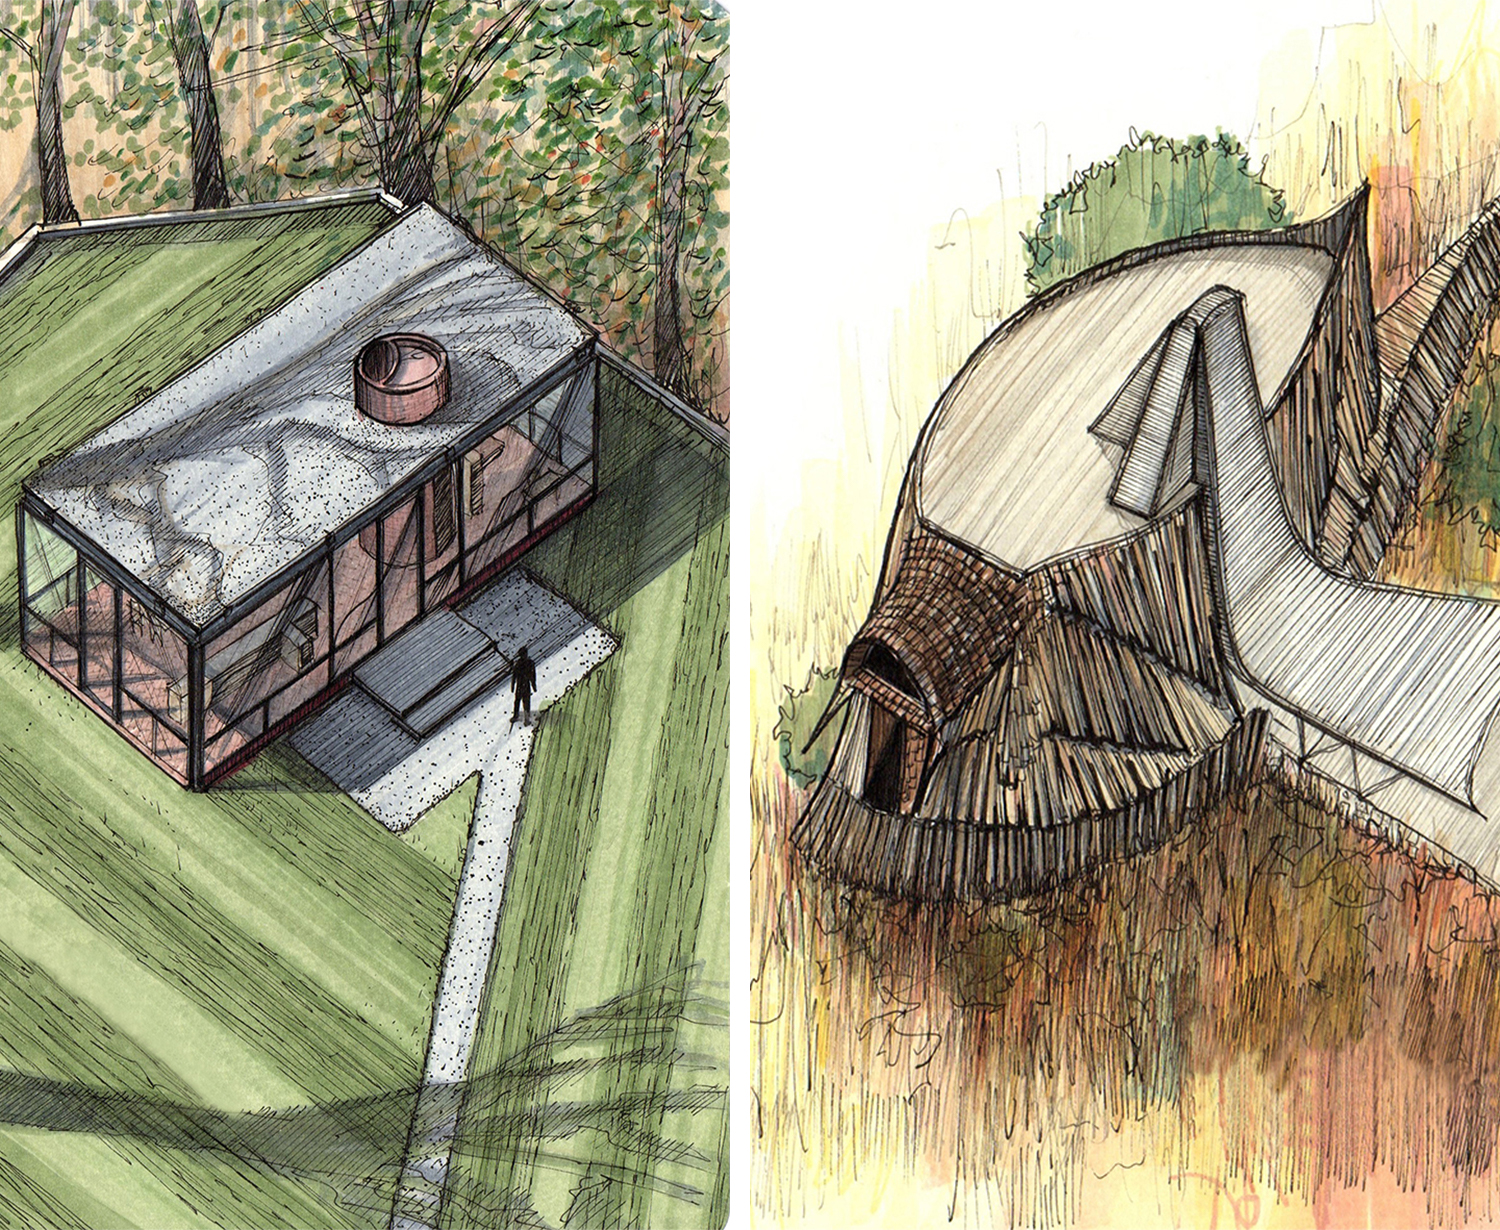 Rodrigo Martín del Campo  on Twitter Made some sketches of The Glass  House in Ponus Ridge Road in New Canaan Connecticut By Philip Johnson  1949 Architecture ArchitectureSketching httpstcoi7tcBoSqDa  X